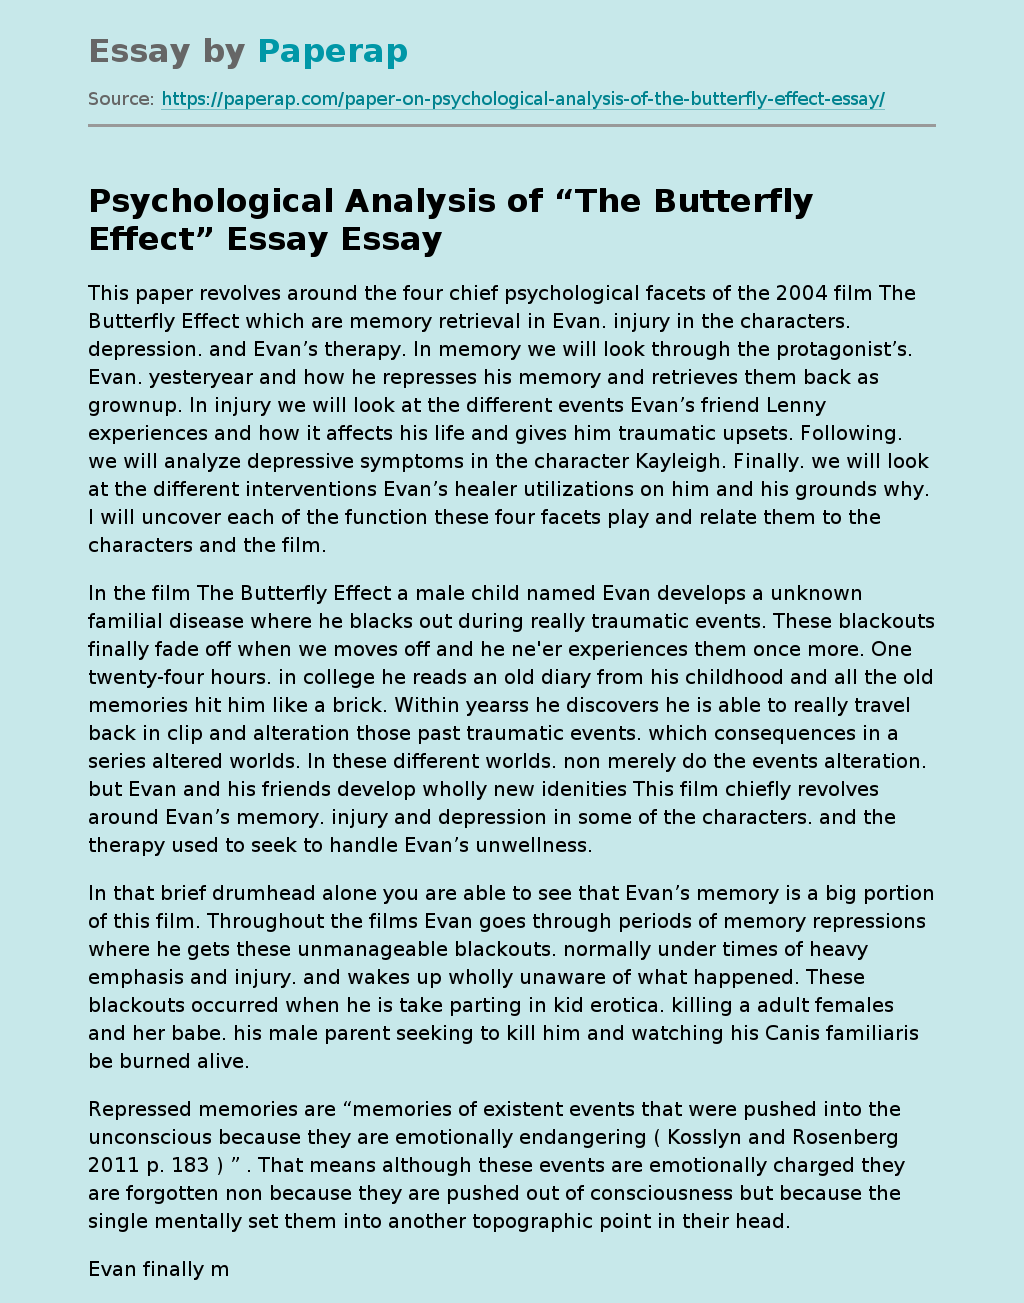 Psychological Analysis of “The Butterfly Effect” Essay